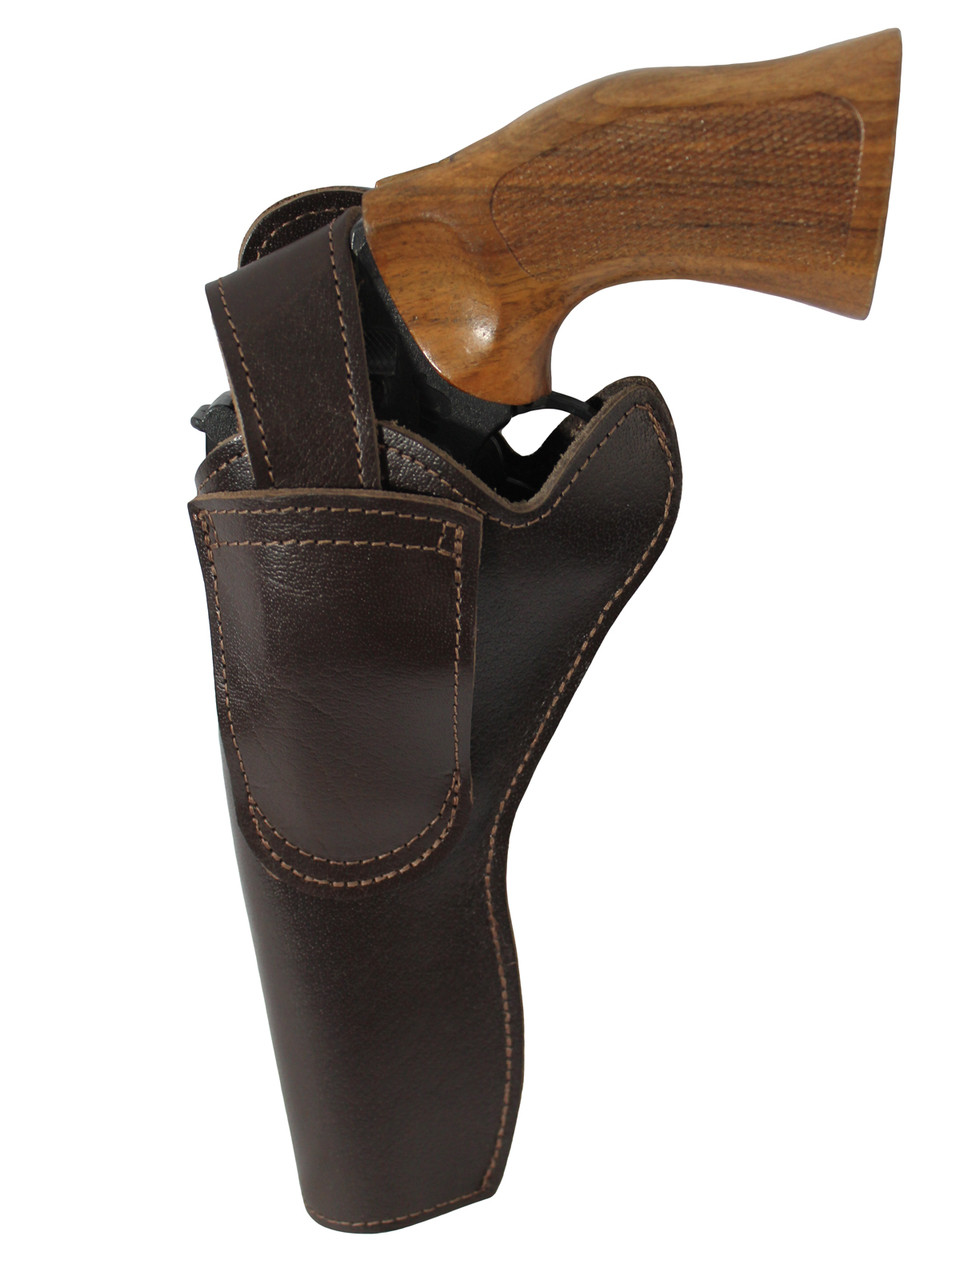 Left hand draw OWB holster